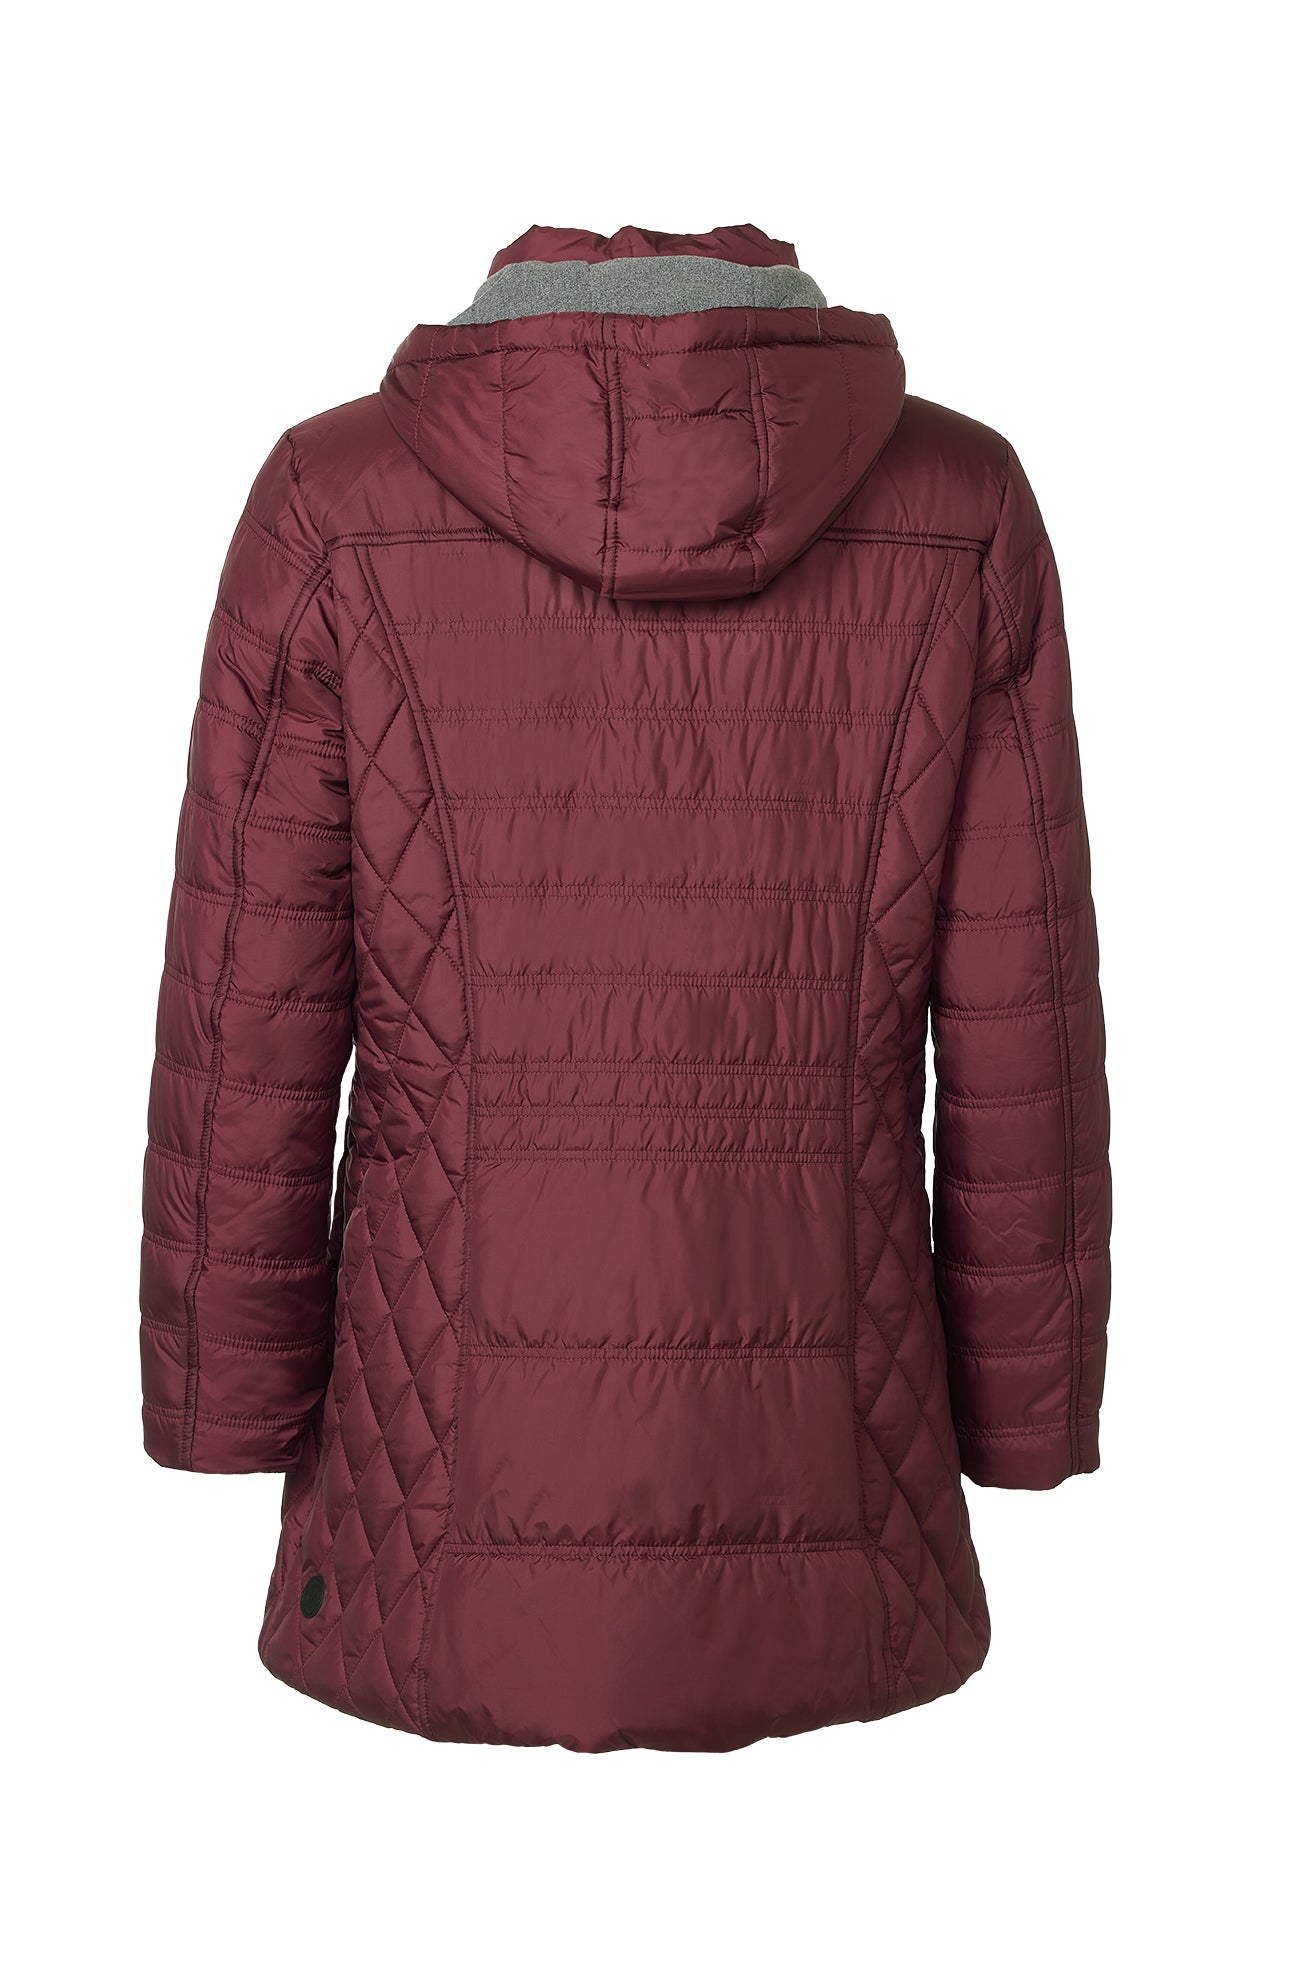 Windfield / Danwear Carly without Fur Recycled 26 Wine.